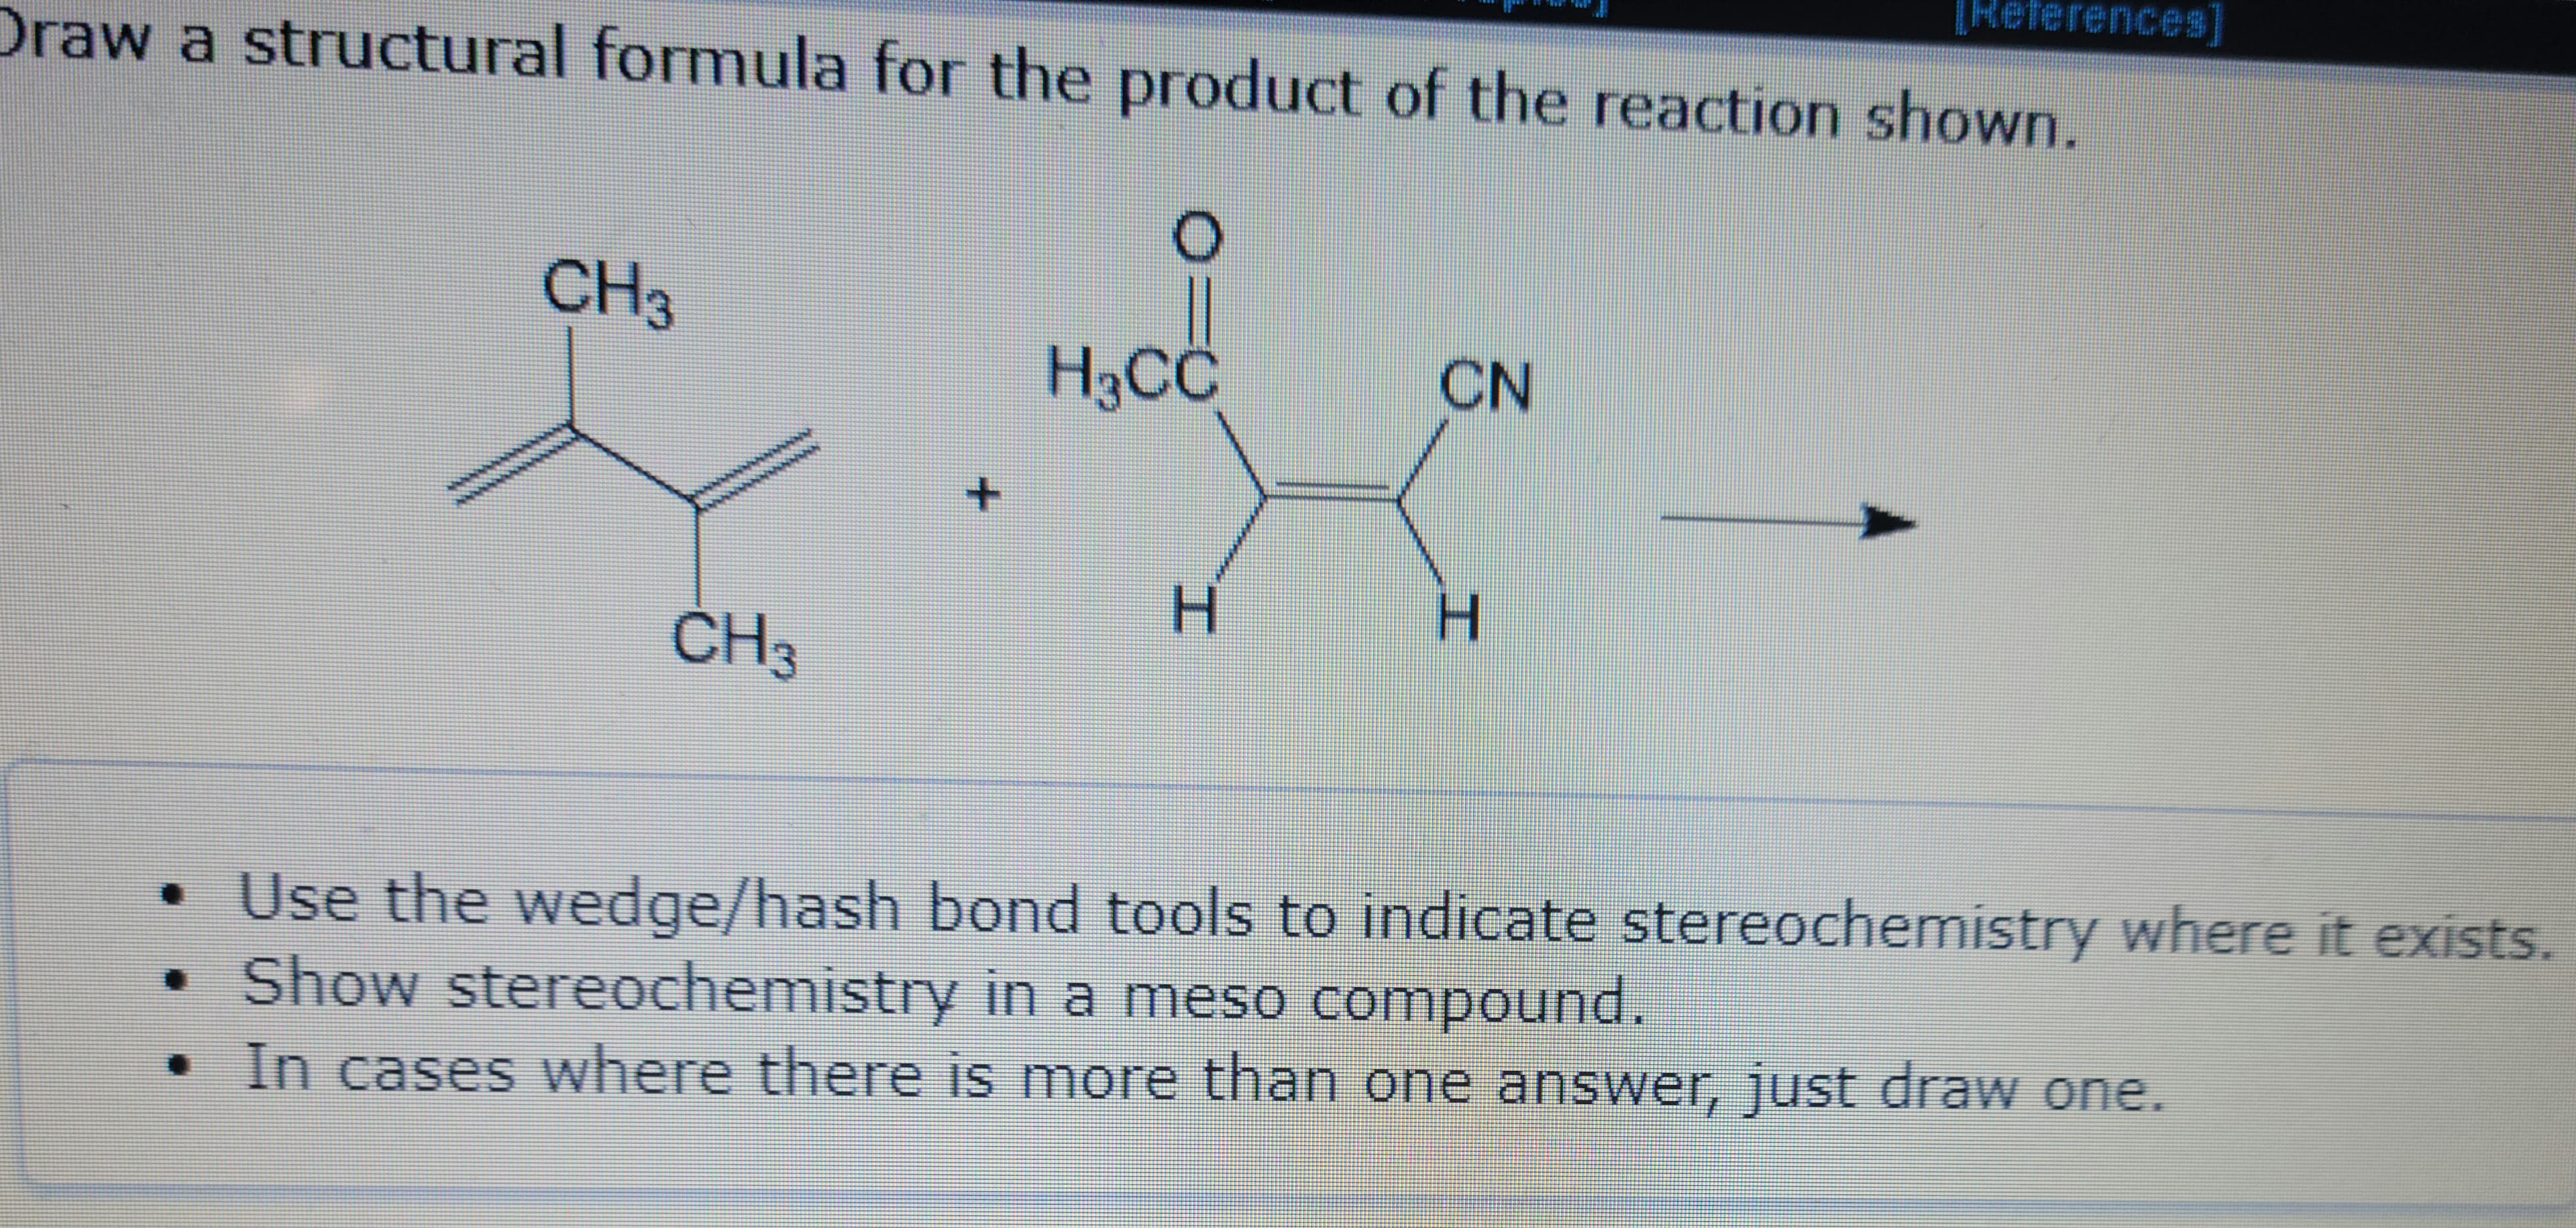 Draw a structural formula for the product of the reaction shown.
O
CH3
q
CH 3
+
H3CC
H
CN
[References]
H
• Use the wedge/hash bond tools to indicate stereochemistry where it exists.
• Show stereochemistry in a meso compound.
In cases where there is more than one answer, just draw one.